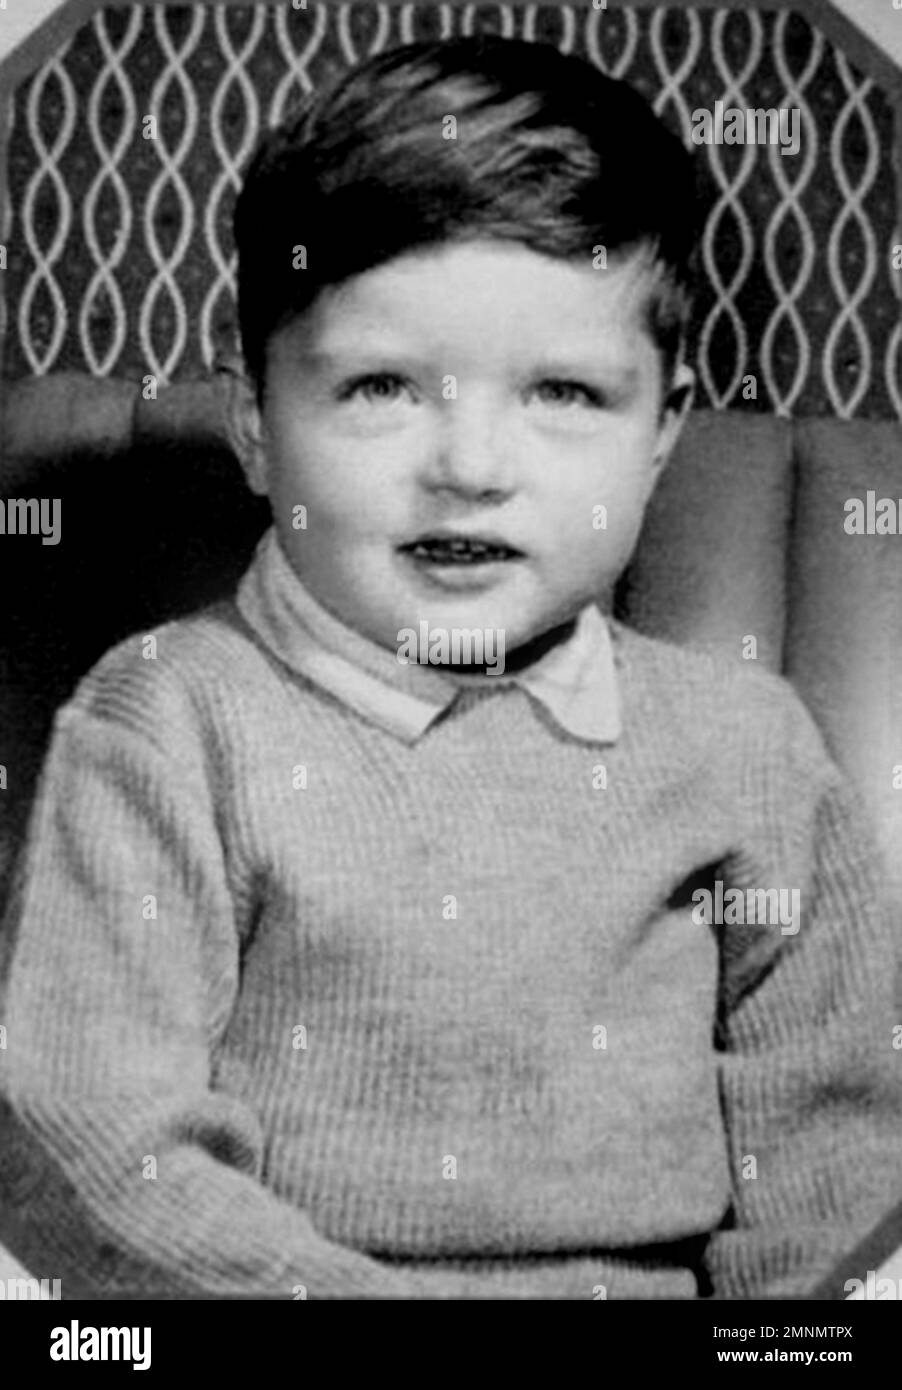 1959 ca , Macclesfield , Cheshire , GREAT BRITAIN : The celebrated british Rock Star singer and composer IAN CURTIS ( 1956 - 1980 ), frontman of New Wave Group JOY DIVISION , when was a young boy aged 3  . Unknown photographer. - HISTORY - FOTO STORICHE - personalità da bambino bambini da giovane - personality personalities when was young -  INFANZIA - CHILDHOOD - BAMBINO - BABY - BABY - BAMBINI - CHILDREN - CHILD - POP MUSIC - MUSICA - cantante - COMPOSITORE - ROCK STAR - DARK - POST PUNK --- ARCHIVIO GBB Stock Photo